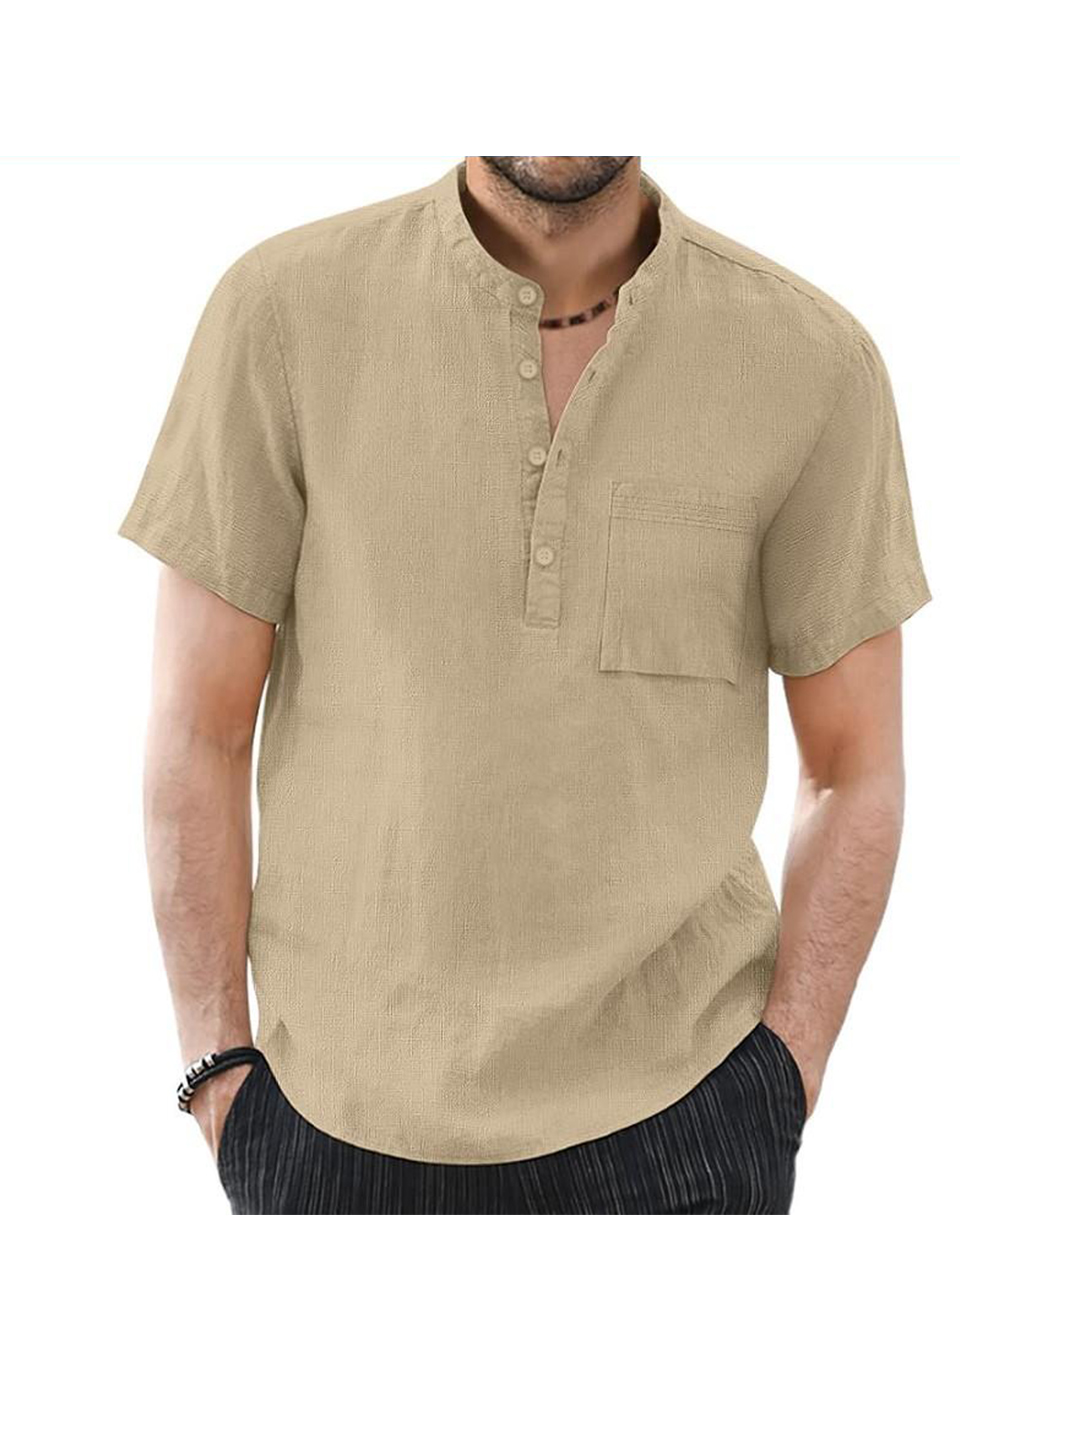 Larry Solid Color Stand Collar Half Placket Short-sleeved Shirt